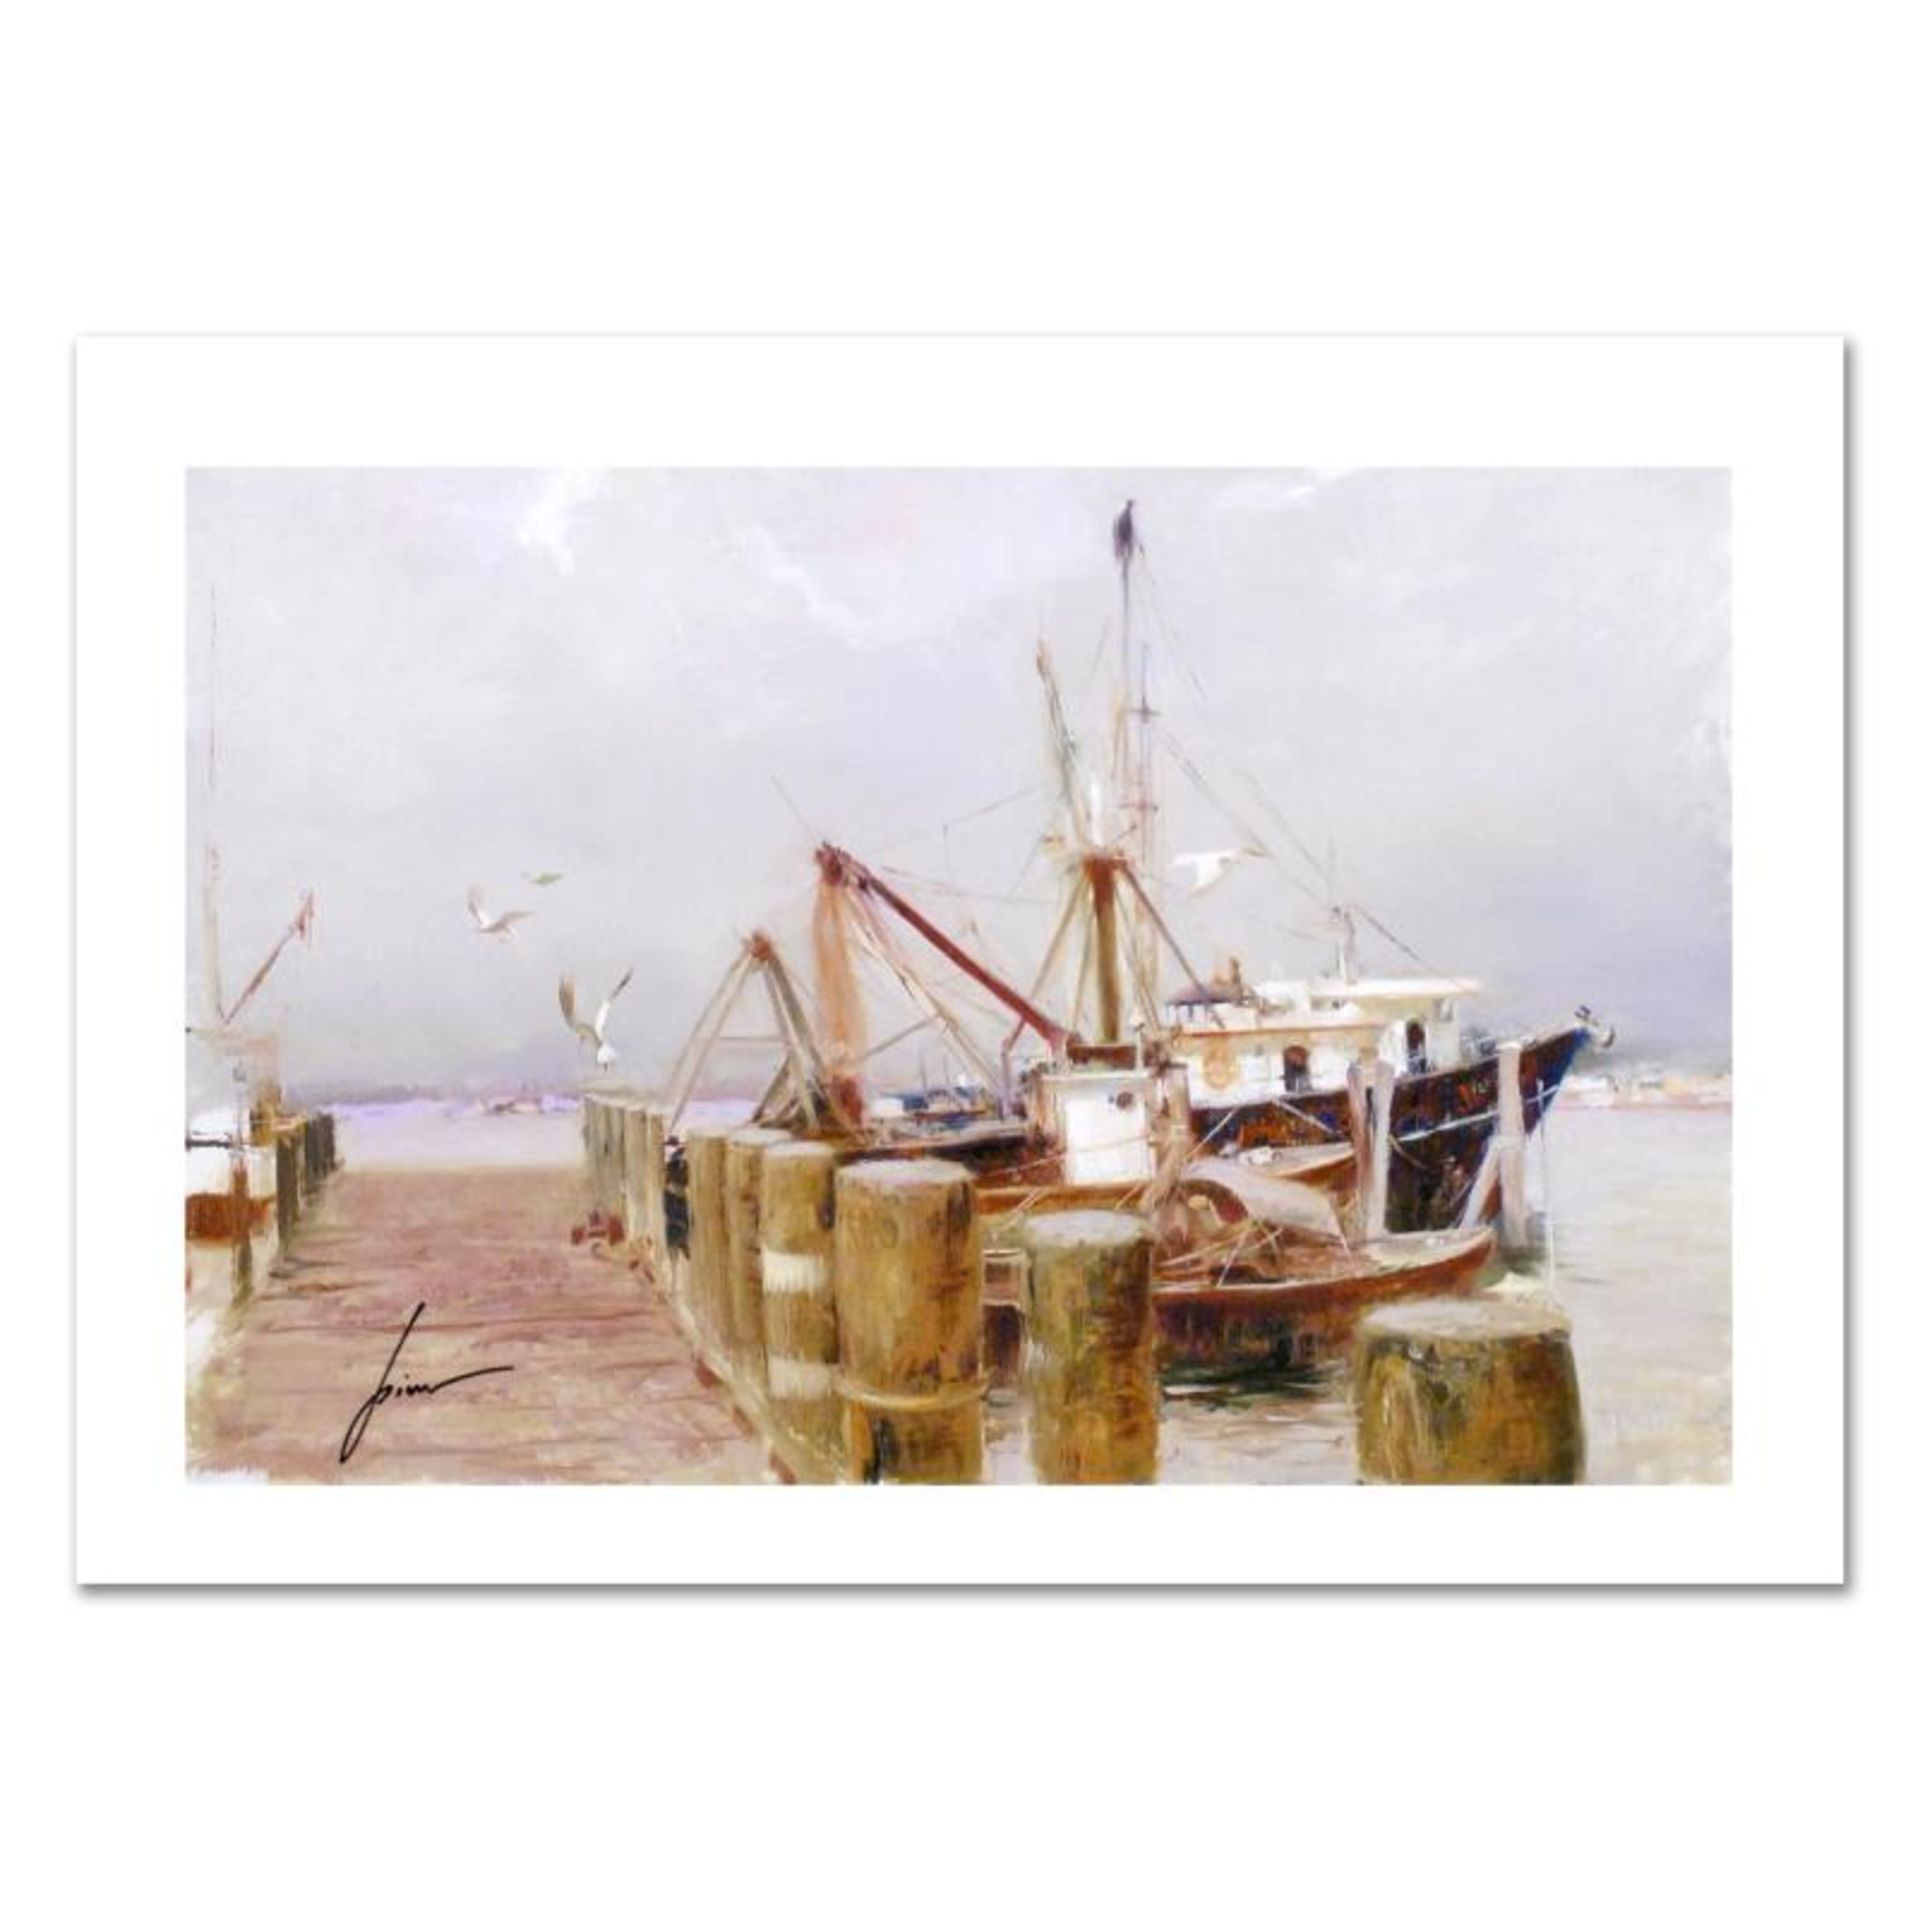 Pino (1931-2010), "Safe Harbor" Limited Edition on Canvas, Numbered and Hand Sig